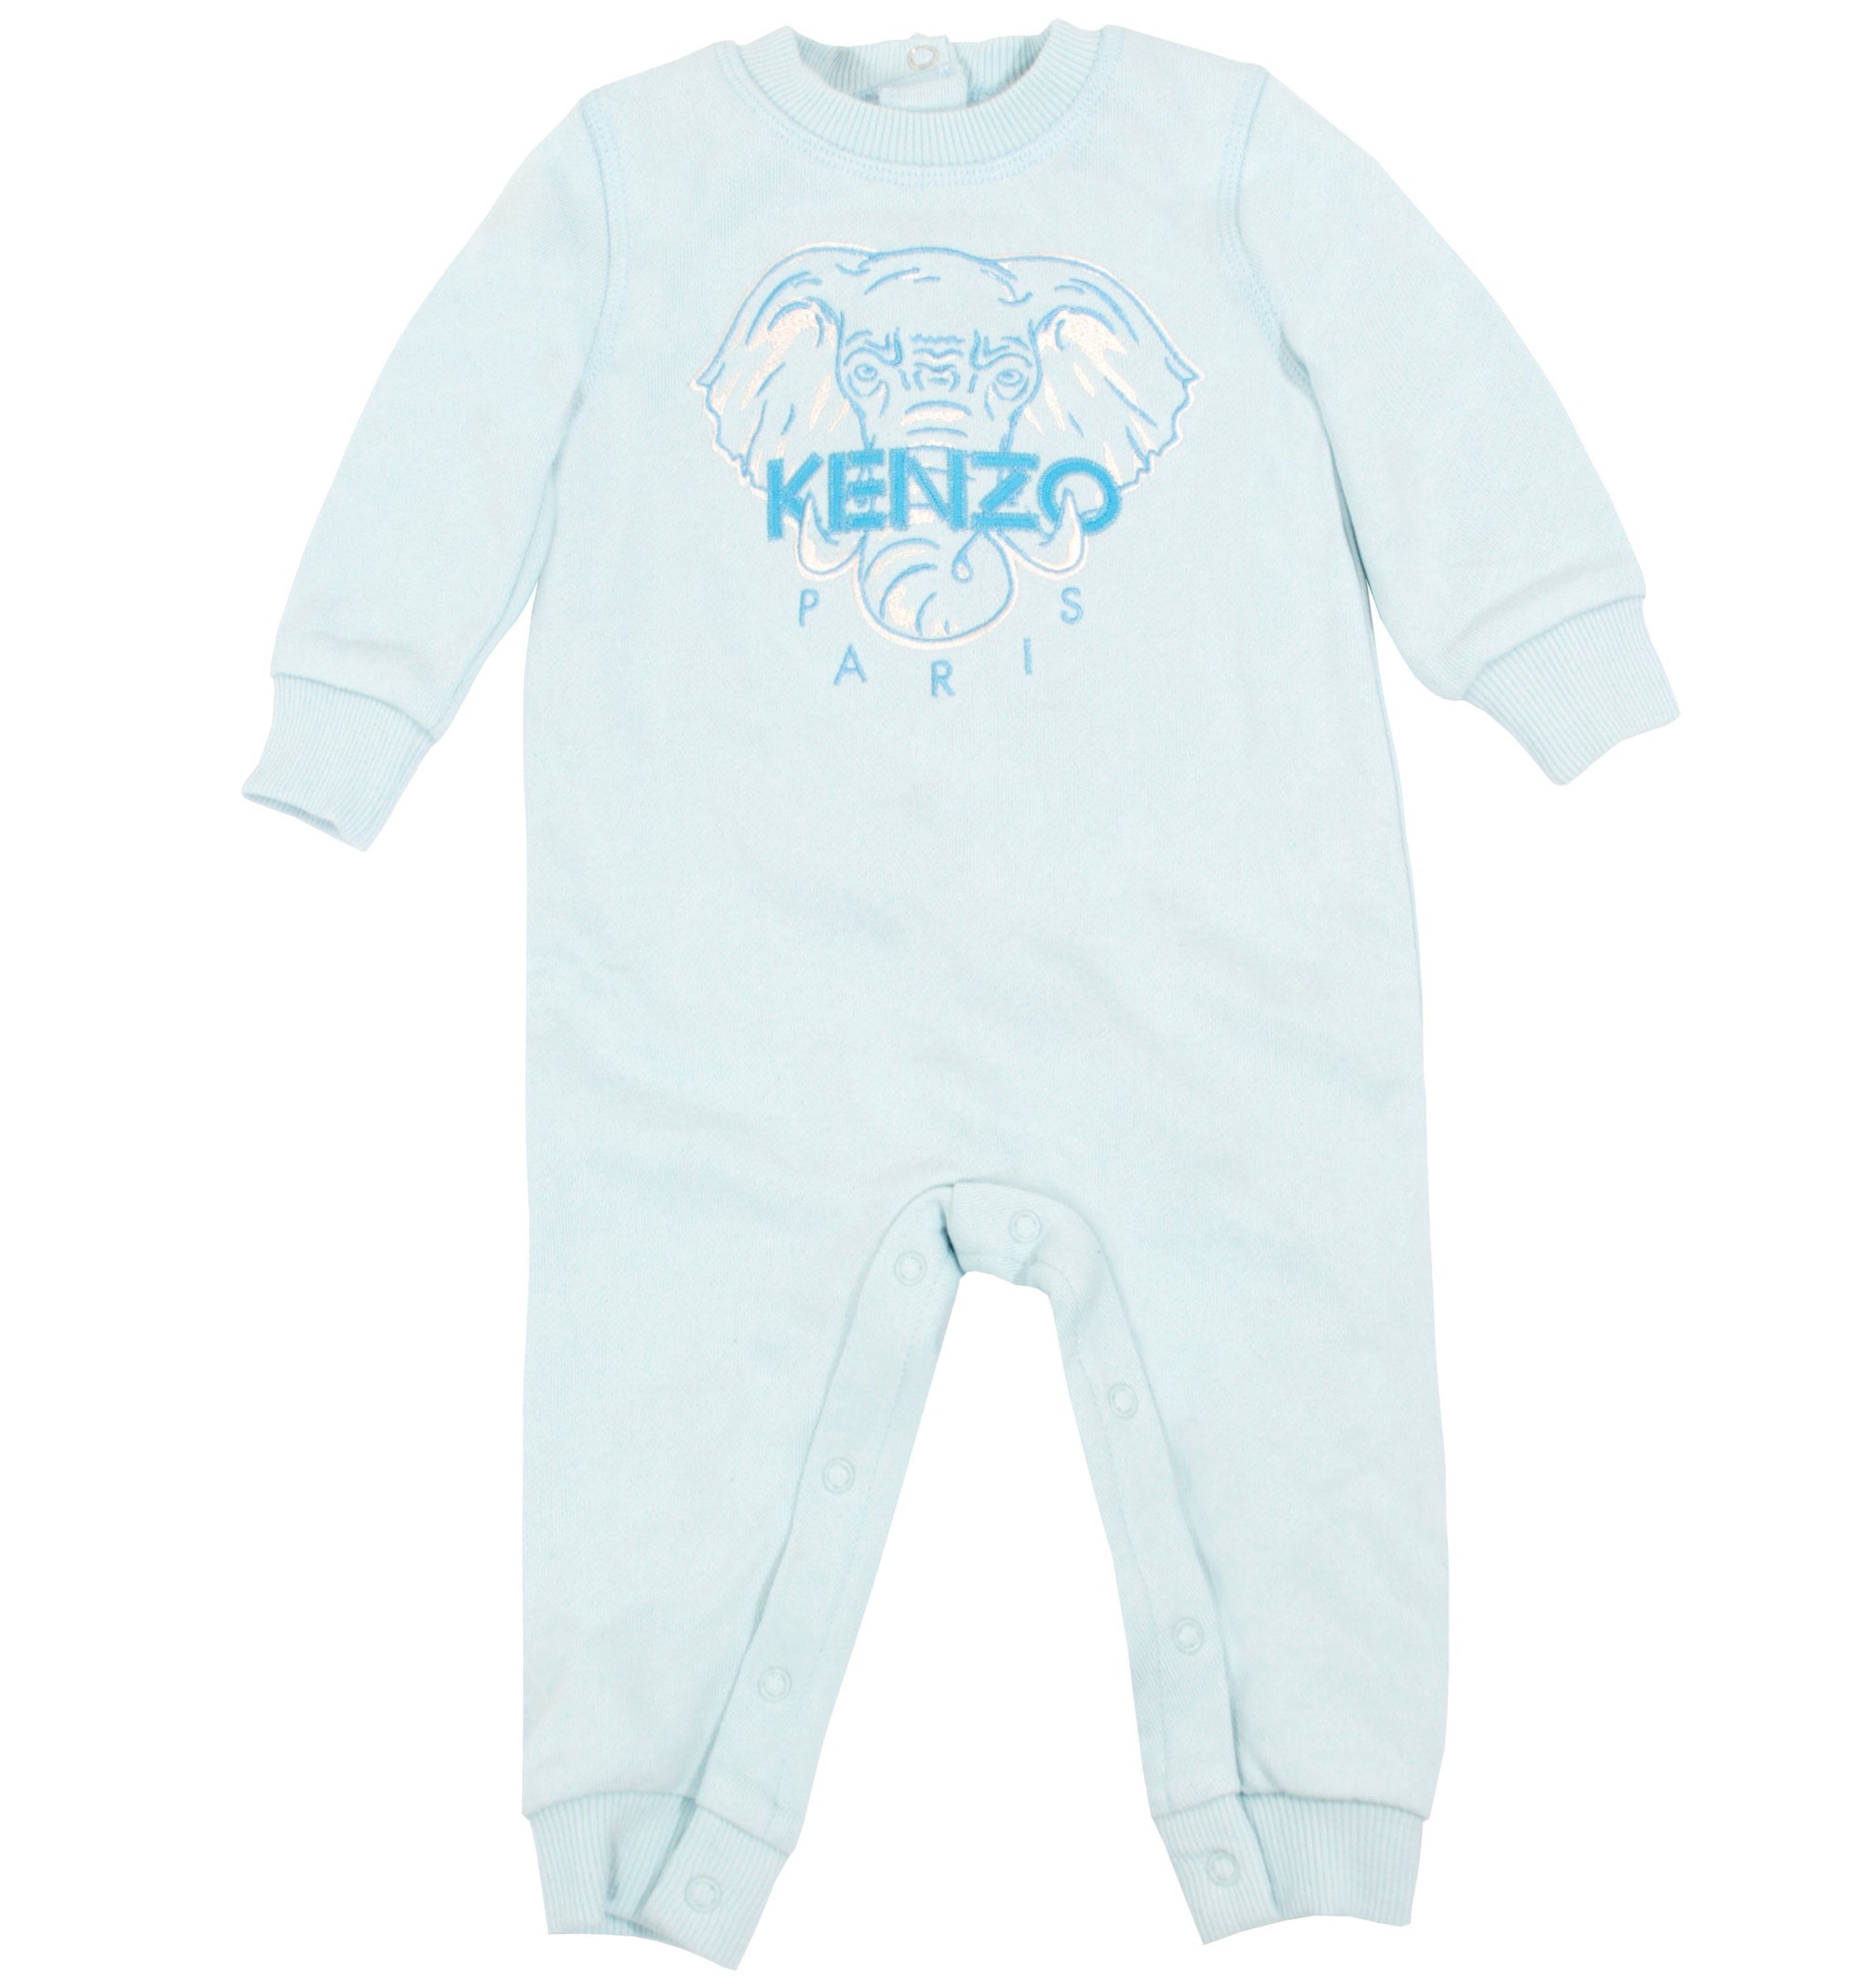 Kenzo Pale Blue All in One